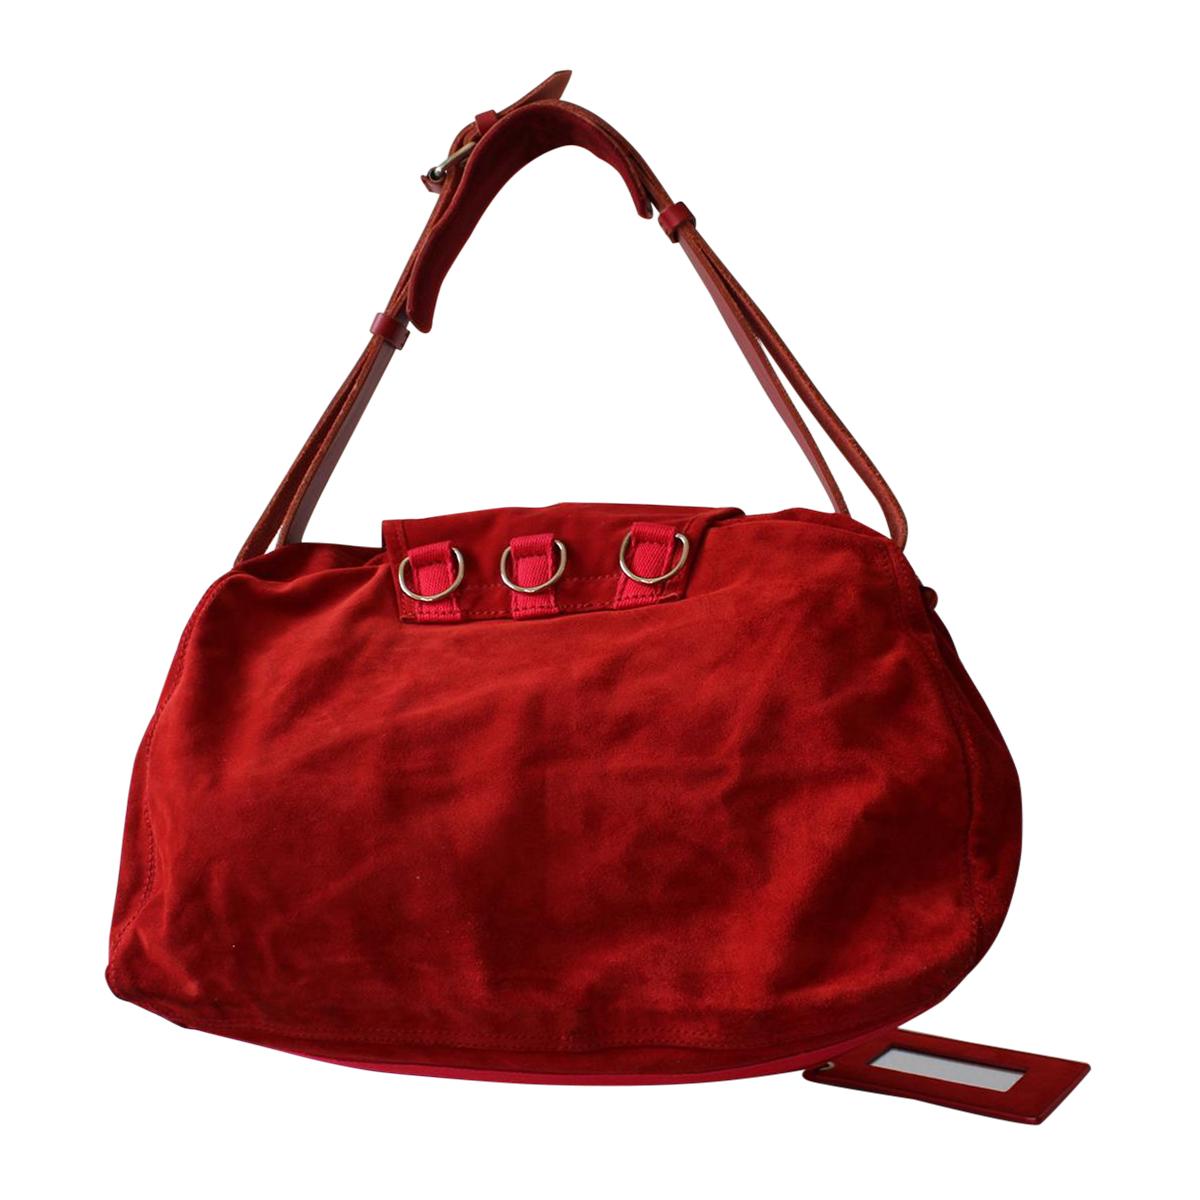 Beautiful Balenciaga bag
Suede
Red color
Single handle
Buckle and zip closure
Two big pockets on the front part
Internal zip pocket
With mirror
Cm 33 x 16 x 23 (12.99 x 6.29 x 9.05 inches)
Presence of little pen mark on the top part, like in